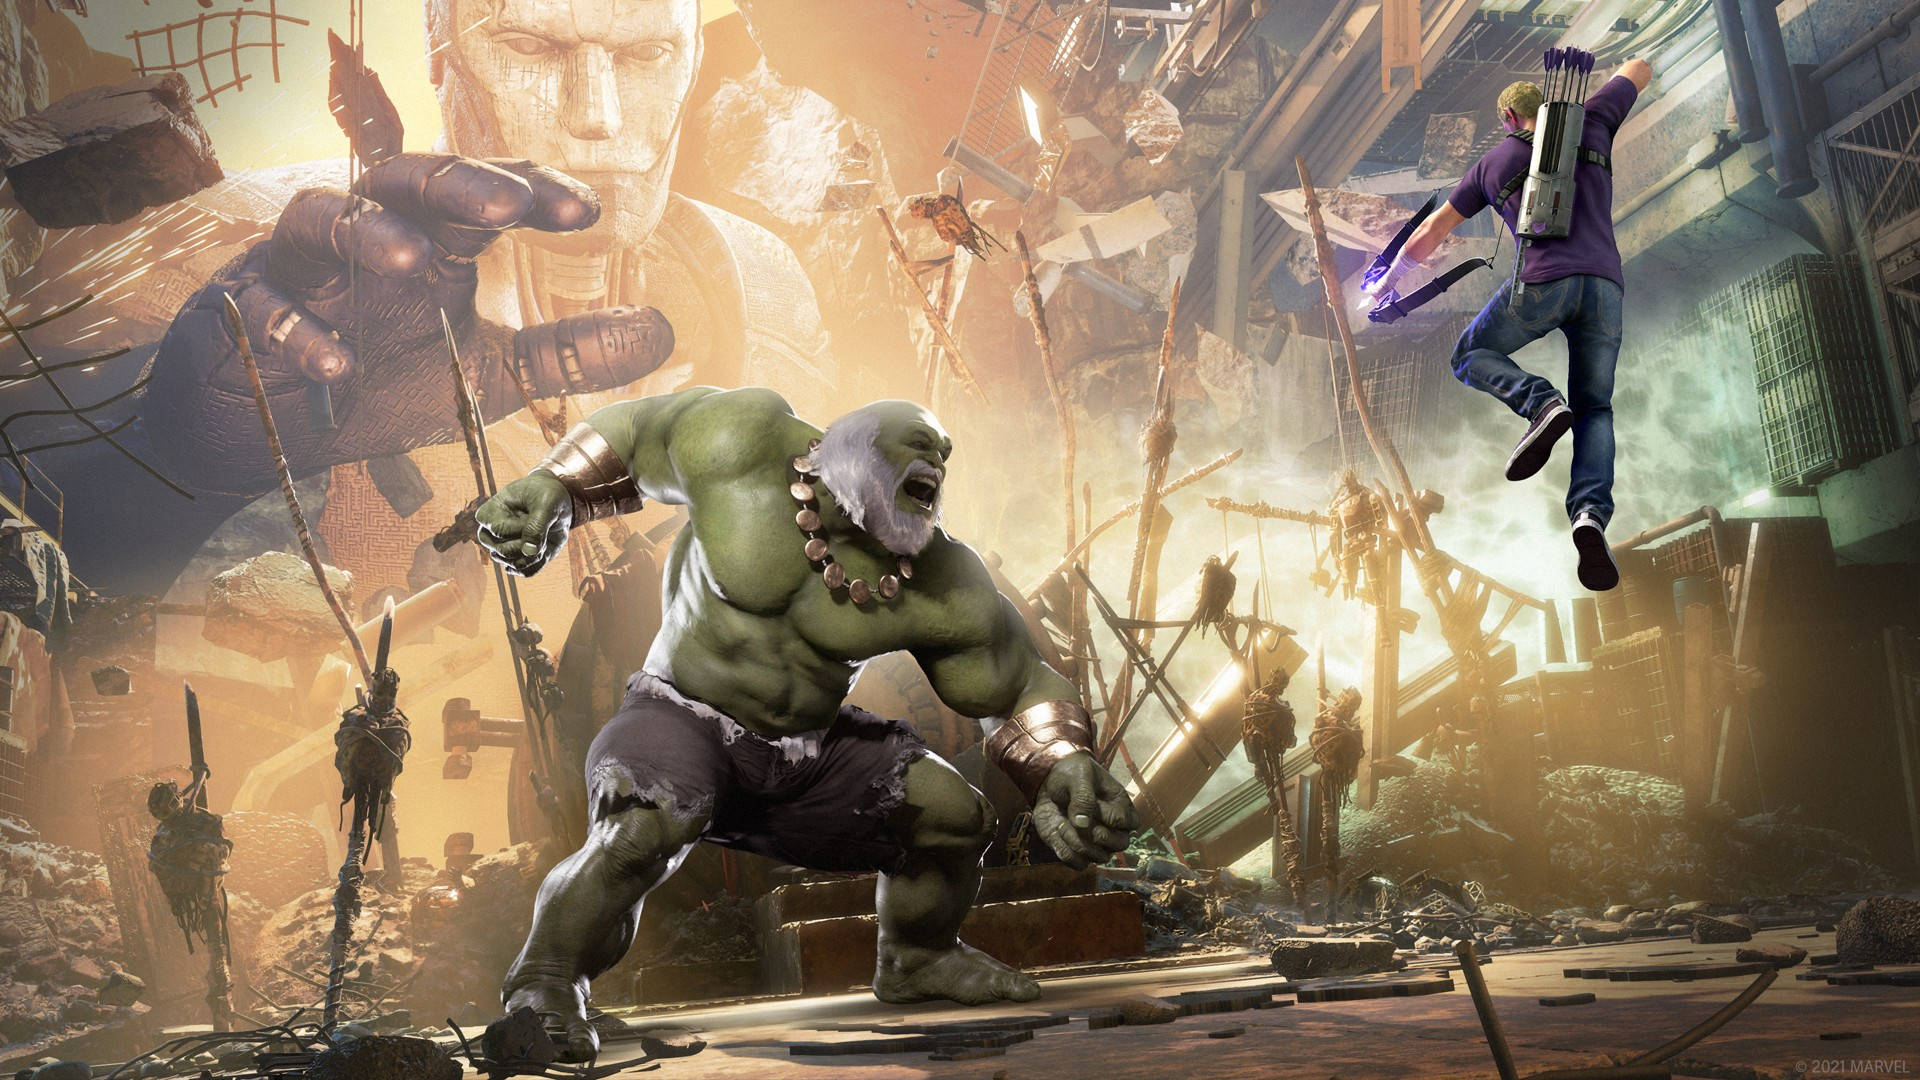 Enjoy the fun and adventure of Marvel-themed Xbox gaming. Wallpaper